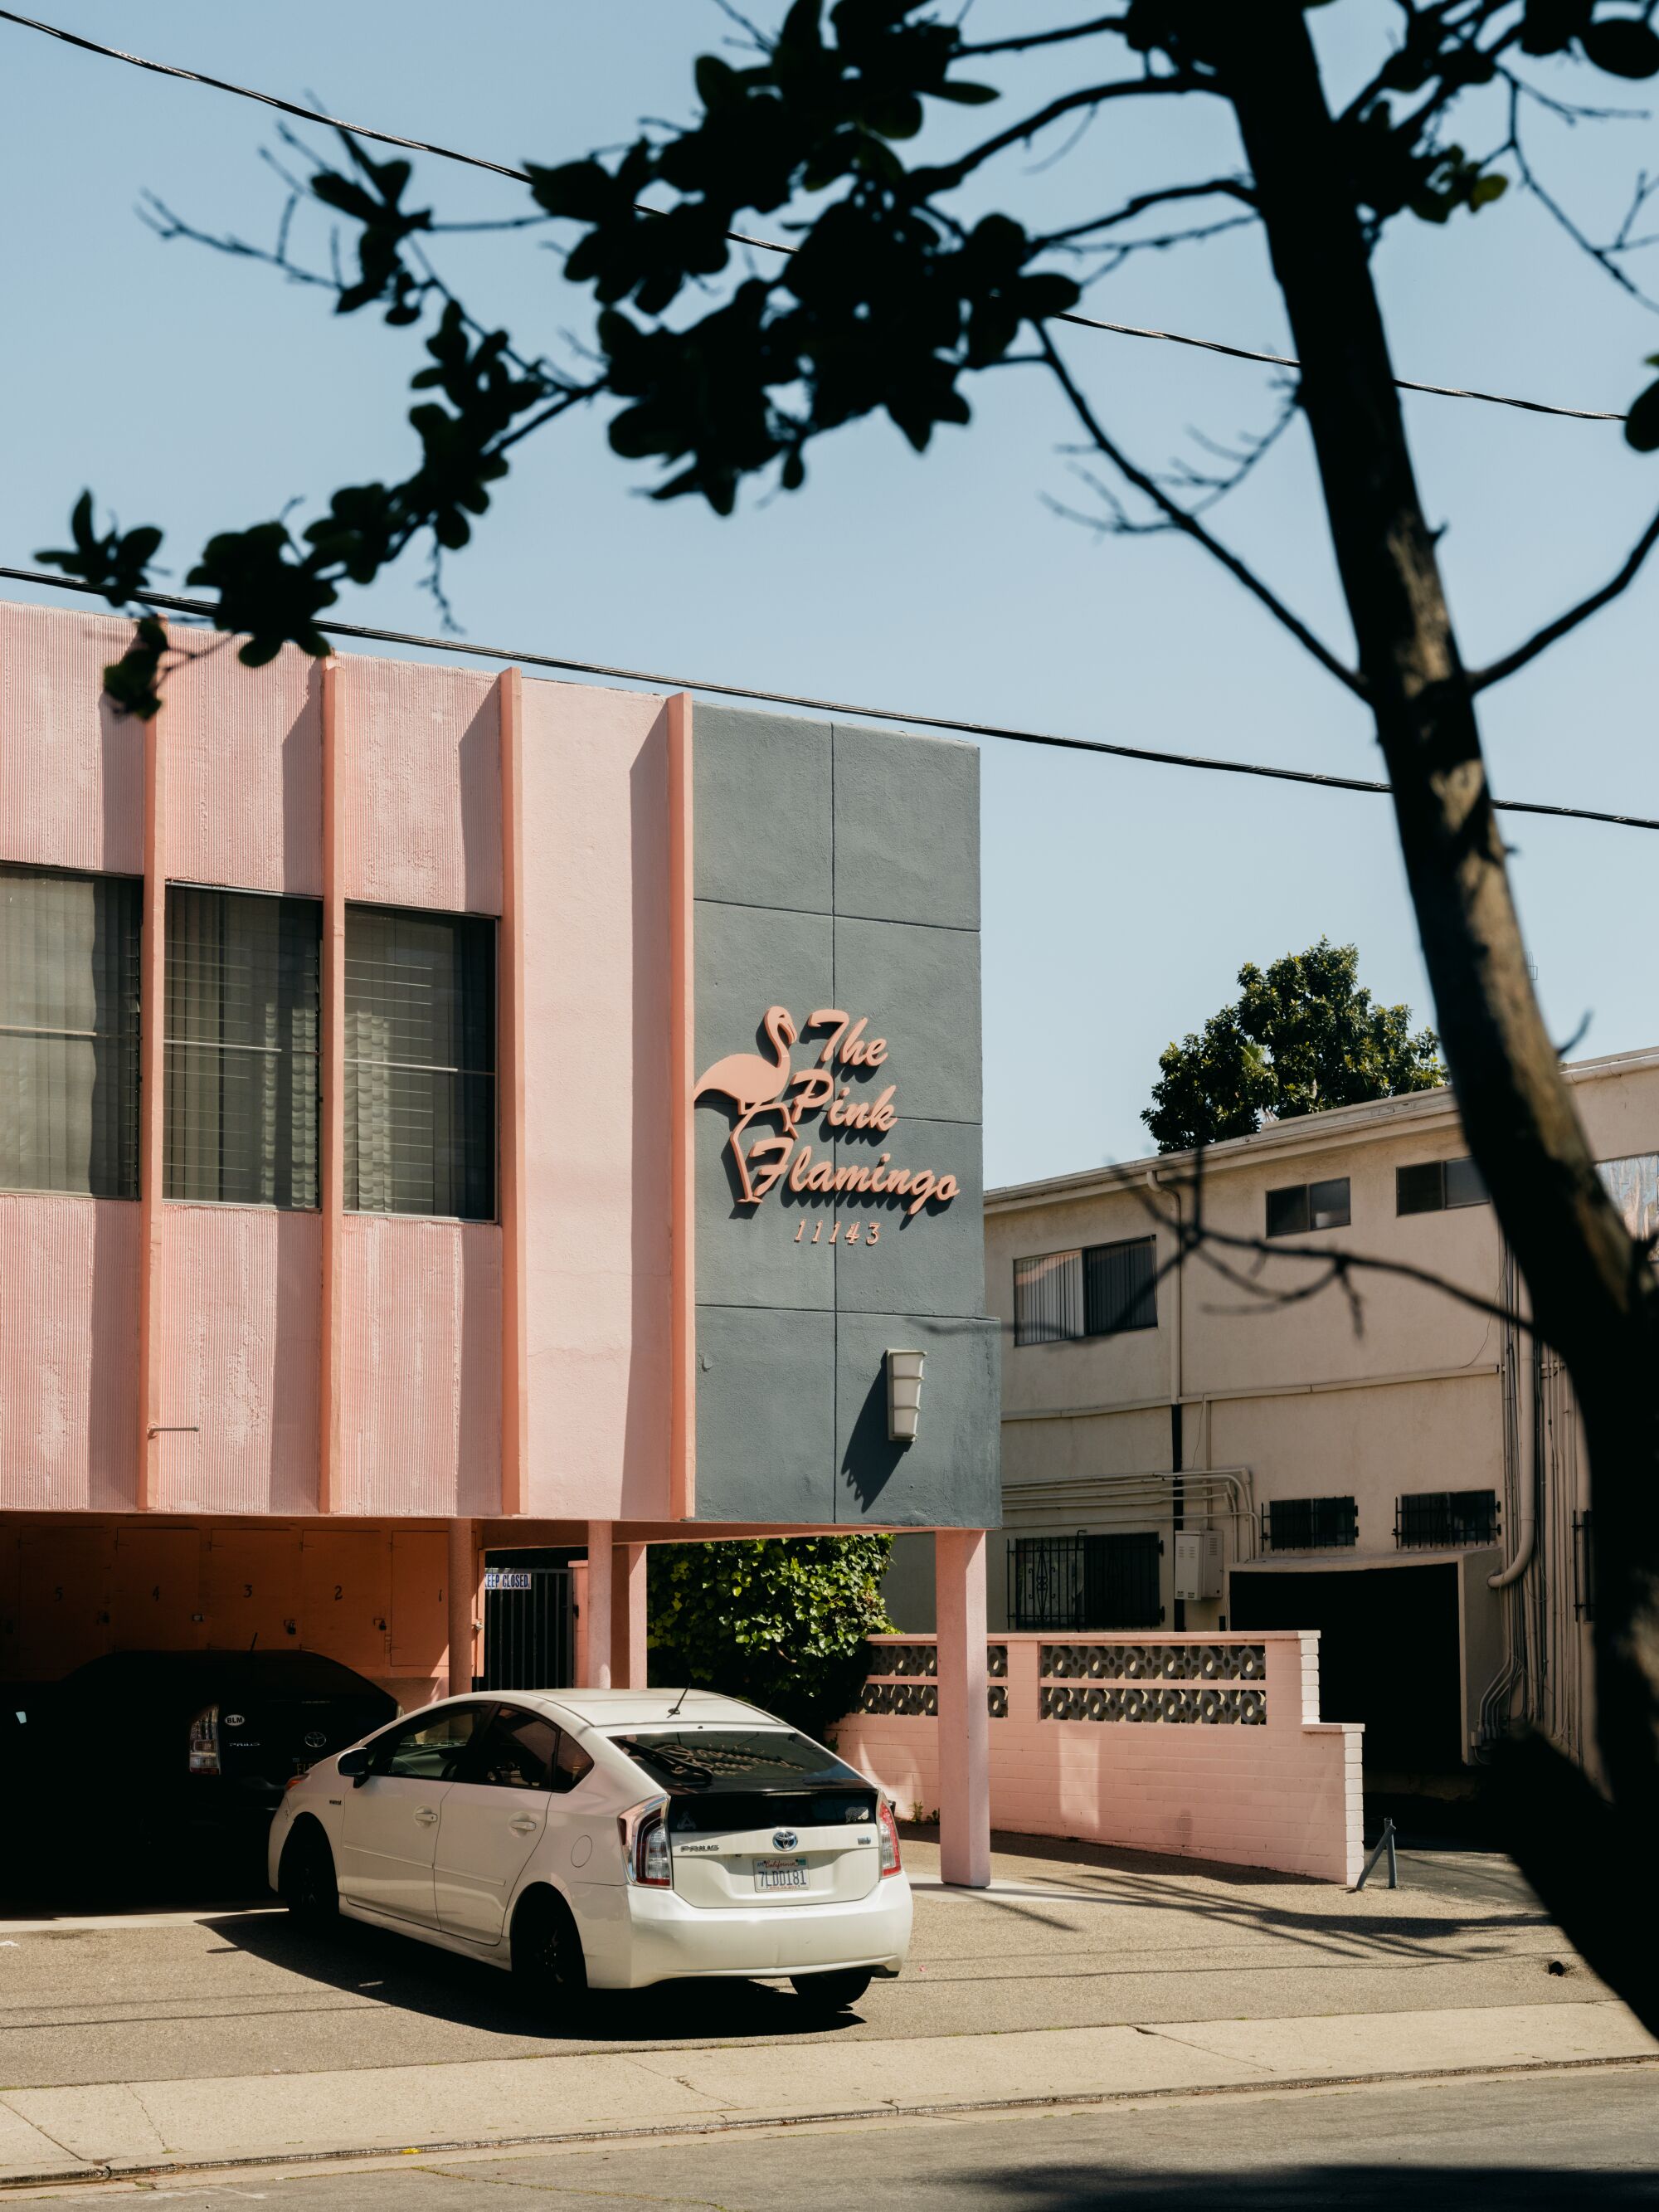 A pink and gray residential building named "The Pink Flamingo" with cars parked underneath